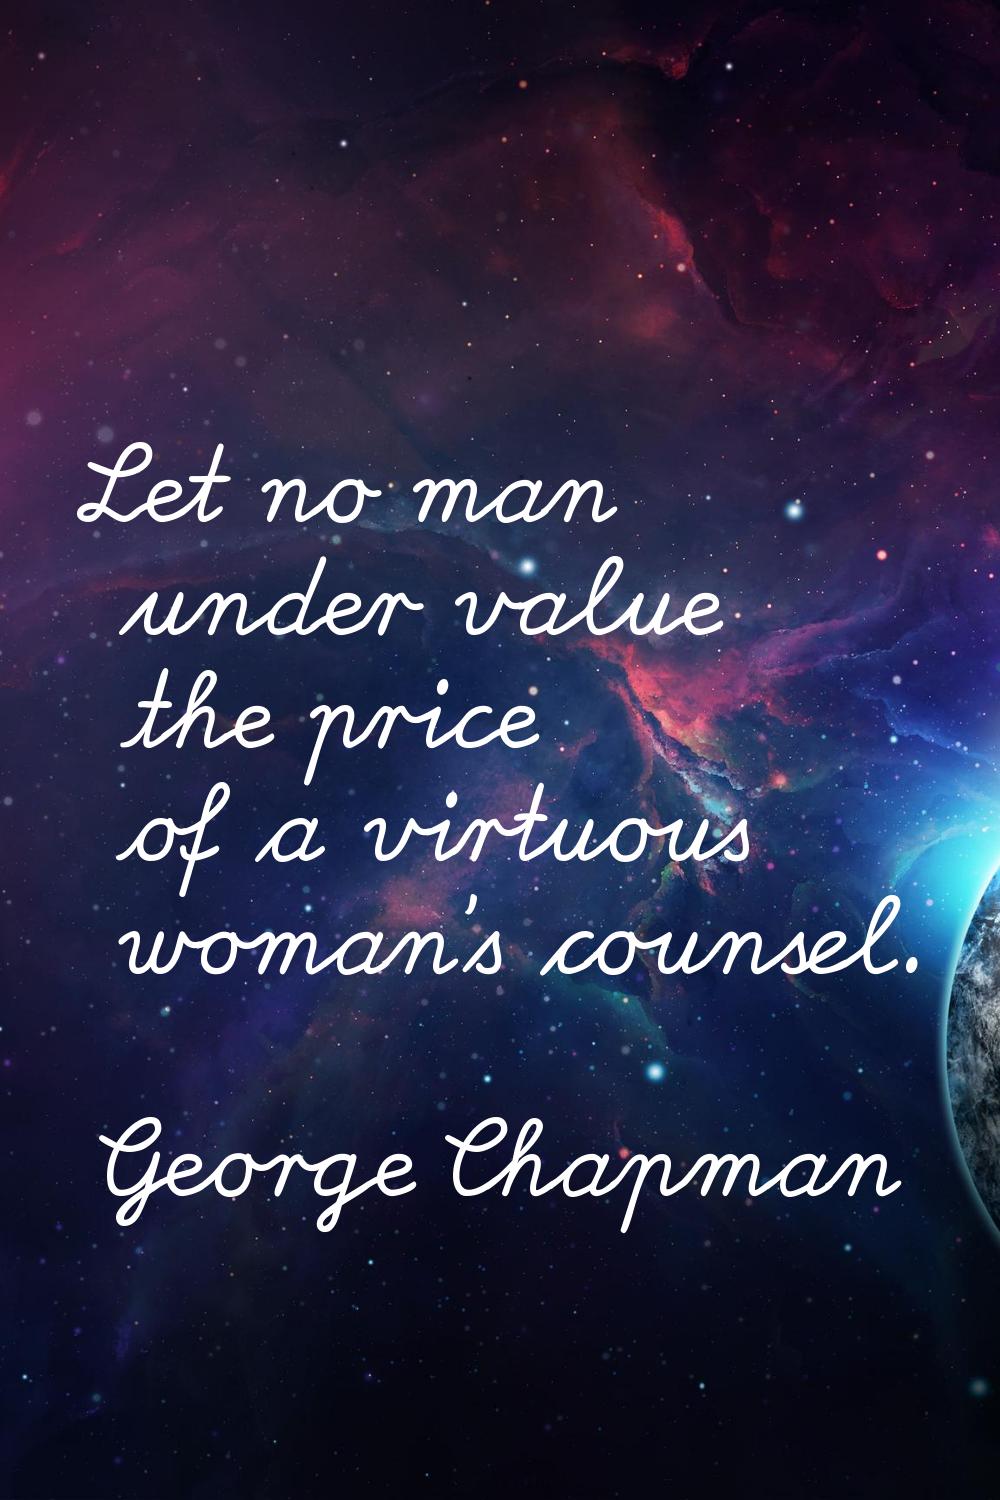 Let no man under value the price of a virtuous woman's counsel.